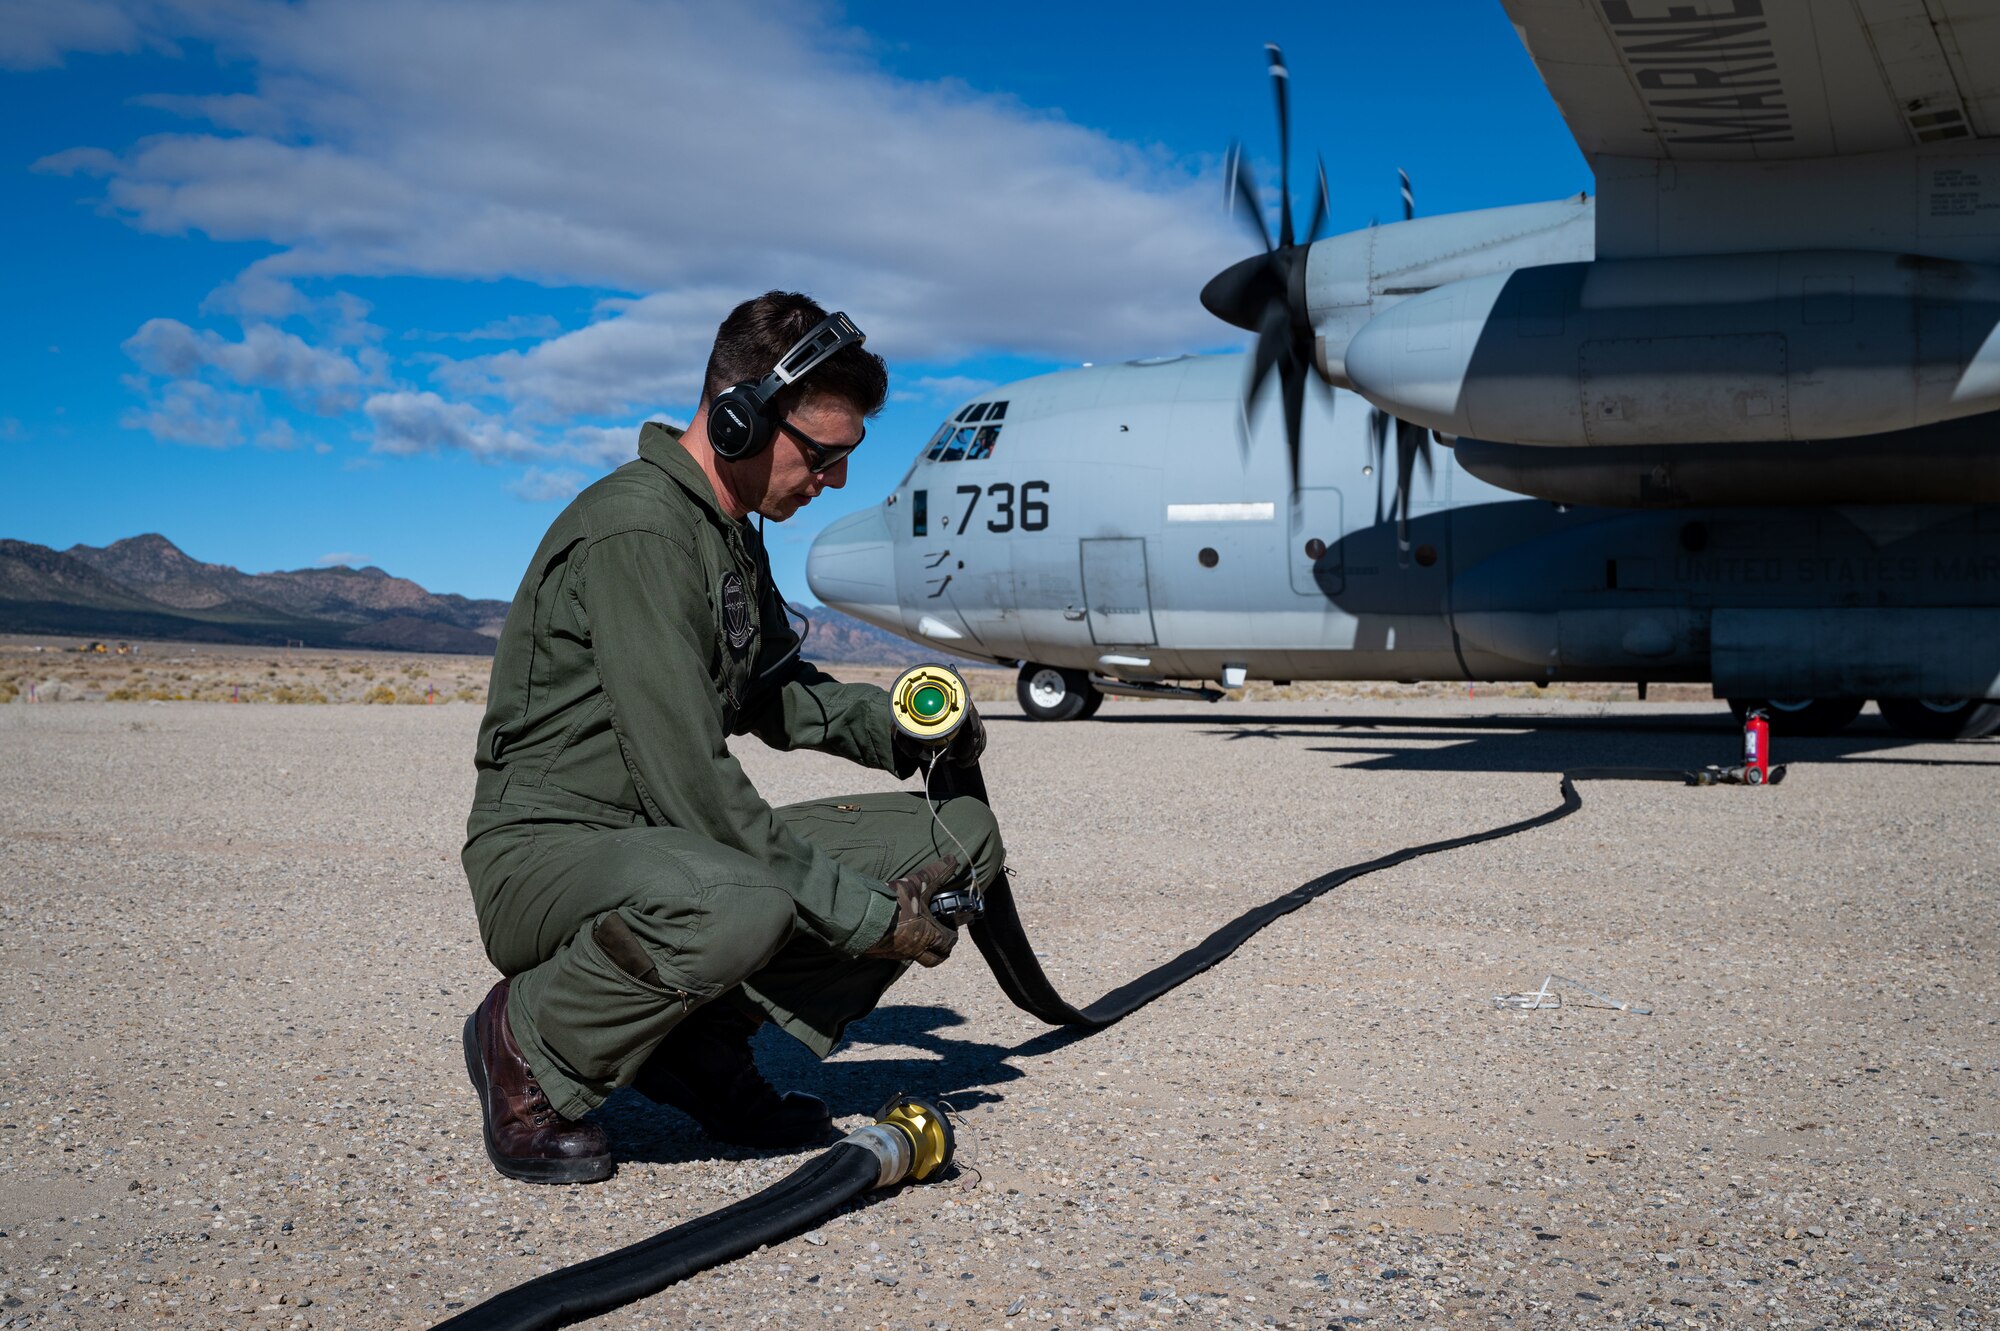 Staff Sgt. Justin Triplett, Marine Aerial Refueler Transport Squadron 352 (VMGR-352), Marine Aircraft Group 11, 3rd Marine Aircraft Wing KC-130J Super Hercules tanker loadmaster, participates in a simulated search and rescue exercise on the Nevada Test and Training Range, Oct. 27, 2021